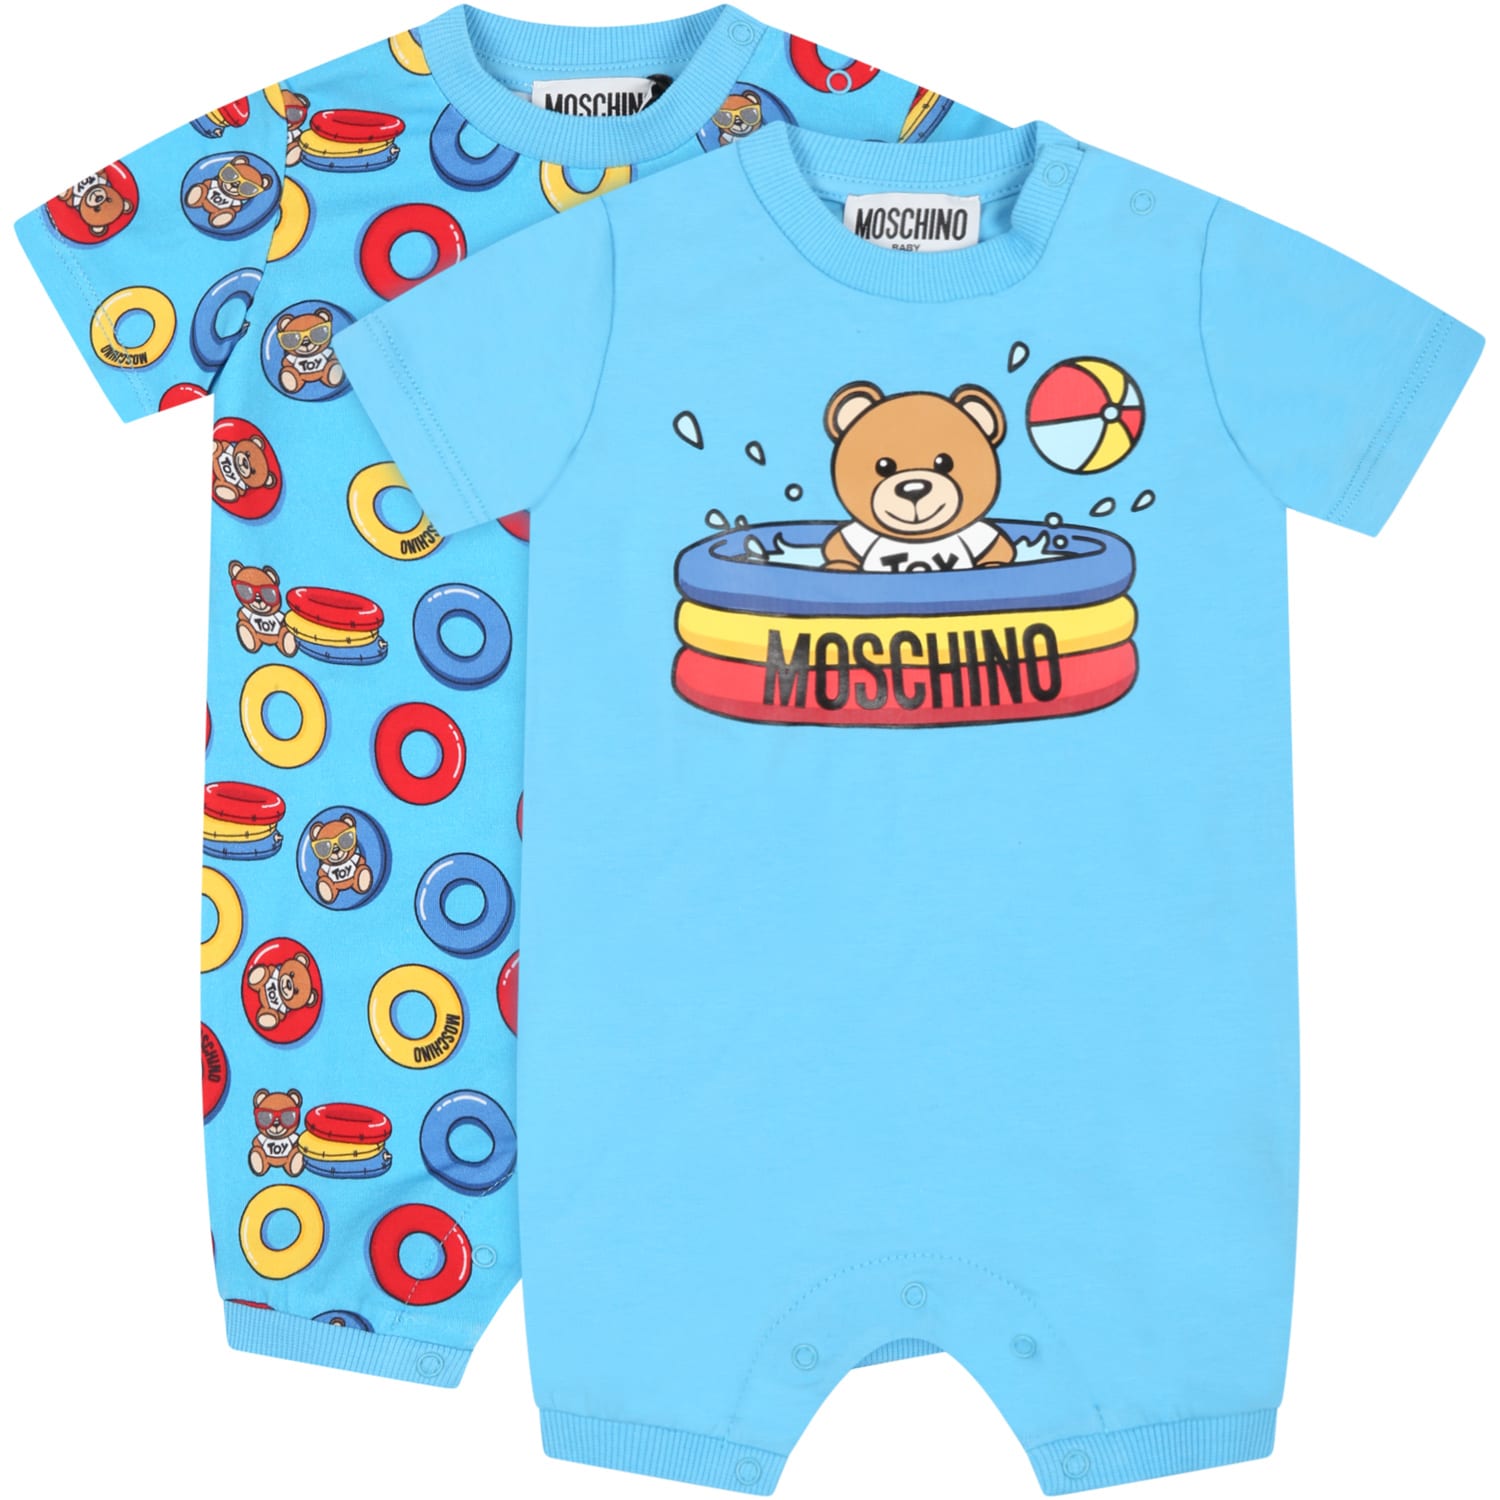 Moschino Light-blue Set For Baby Boy With Teddy Bears